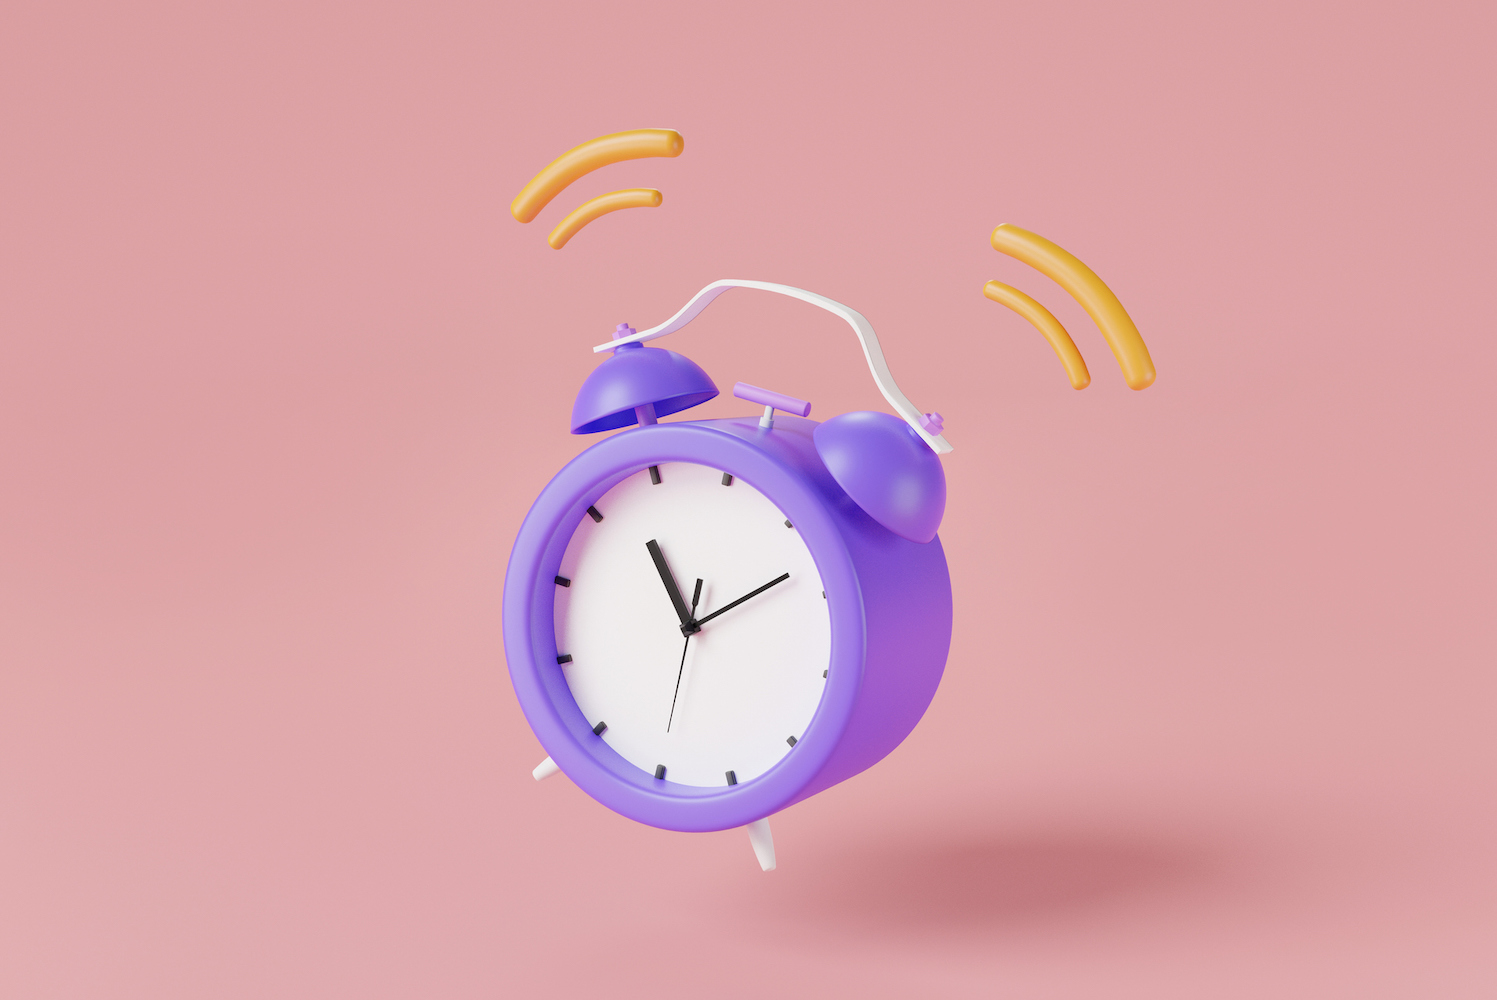 Ringing purple alarm clock on pink background. For deep due diligence, minimize disruption to maximize success.